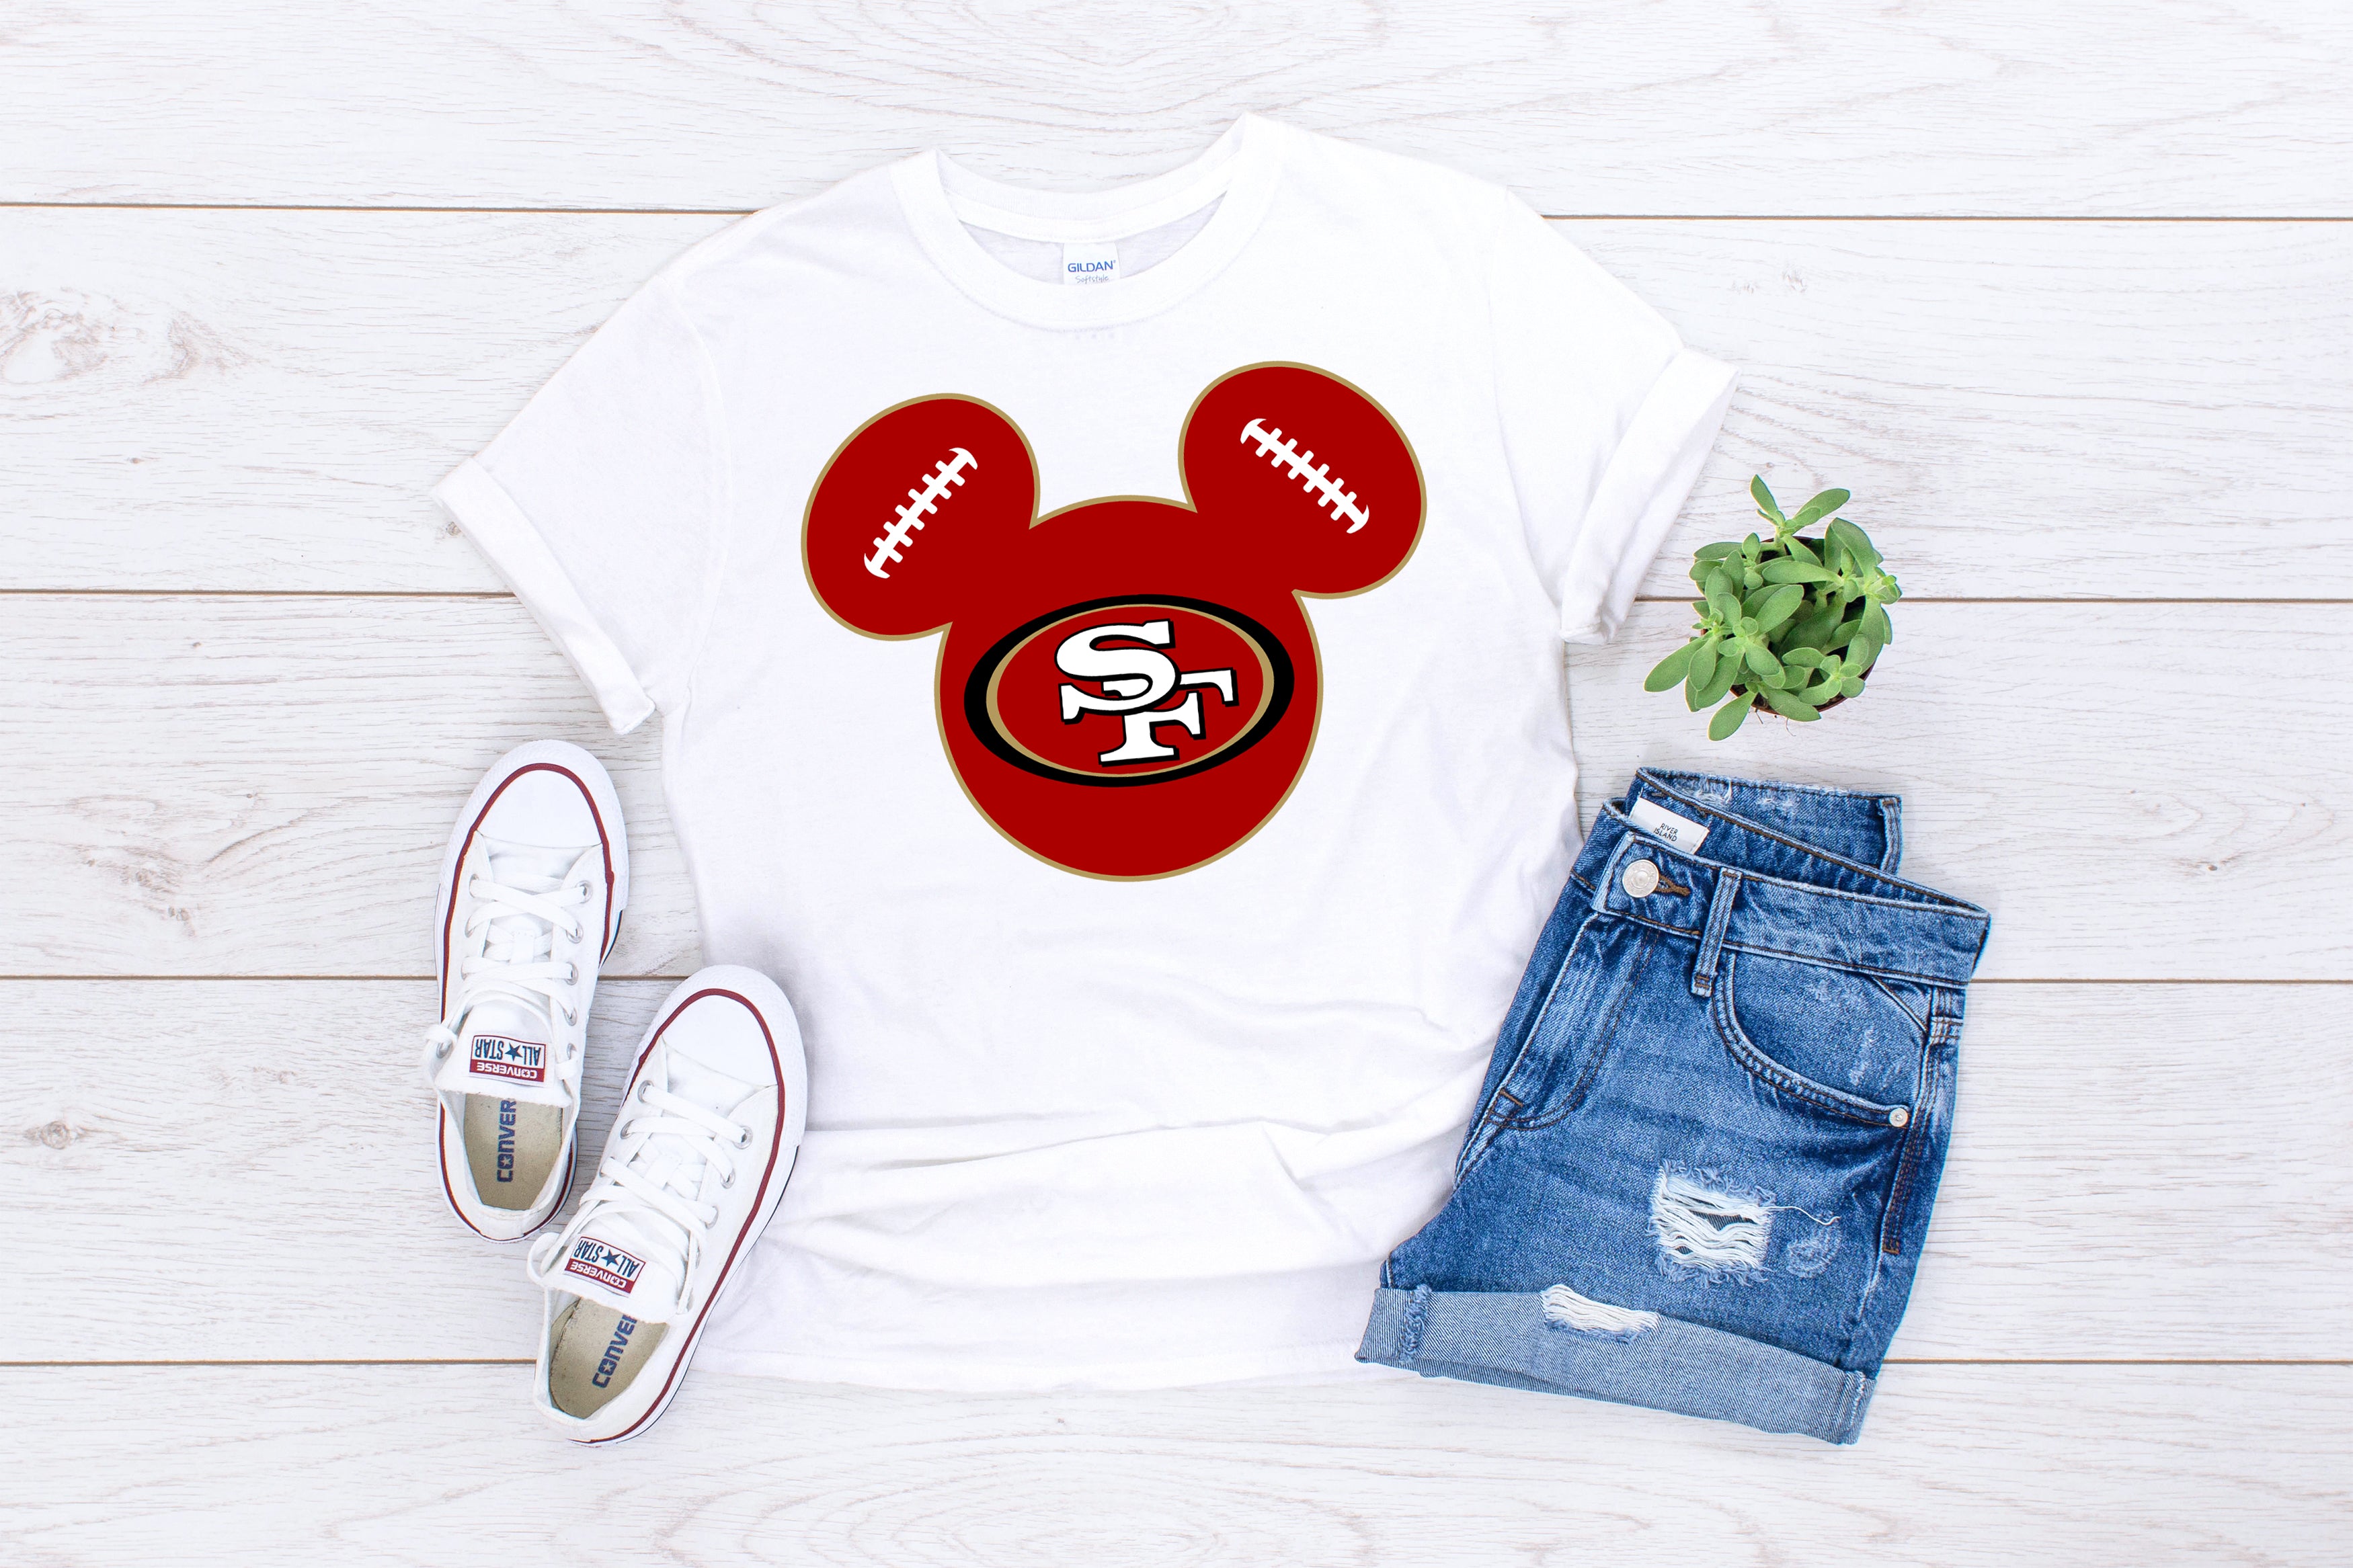 mickey mouse san francisco 49ers